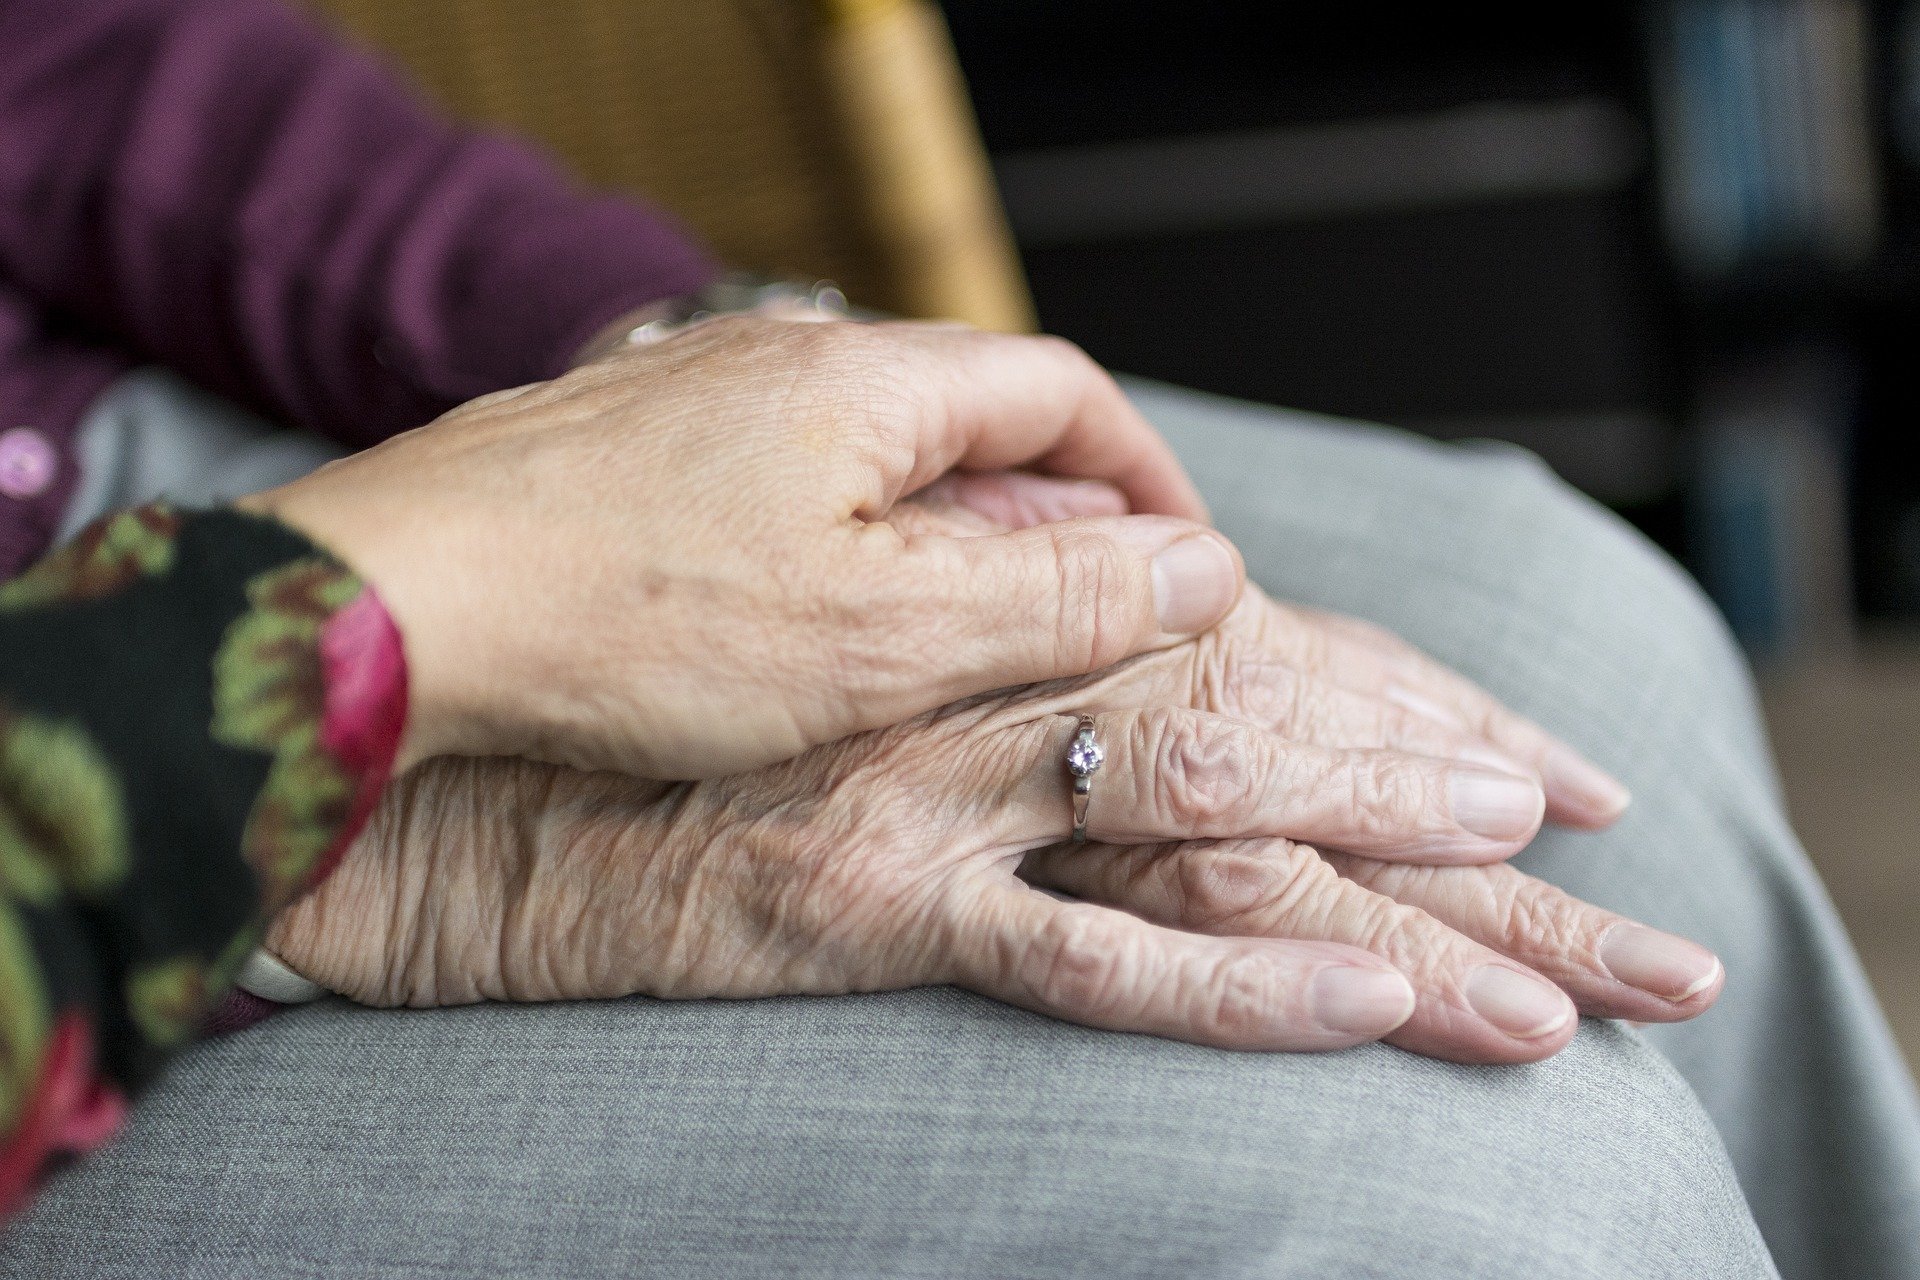 The hand of a younger person holds the hands of an older person